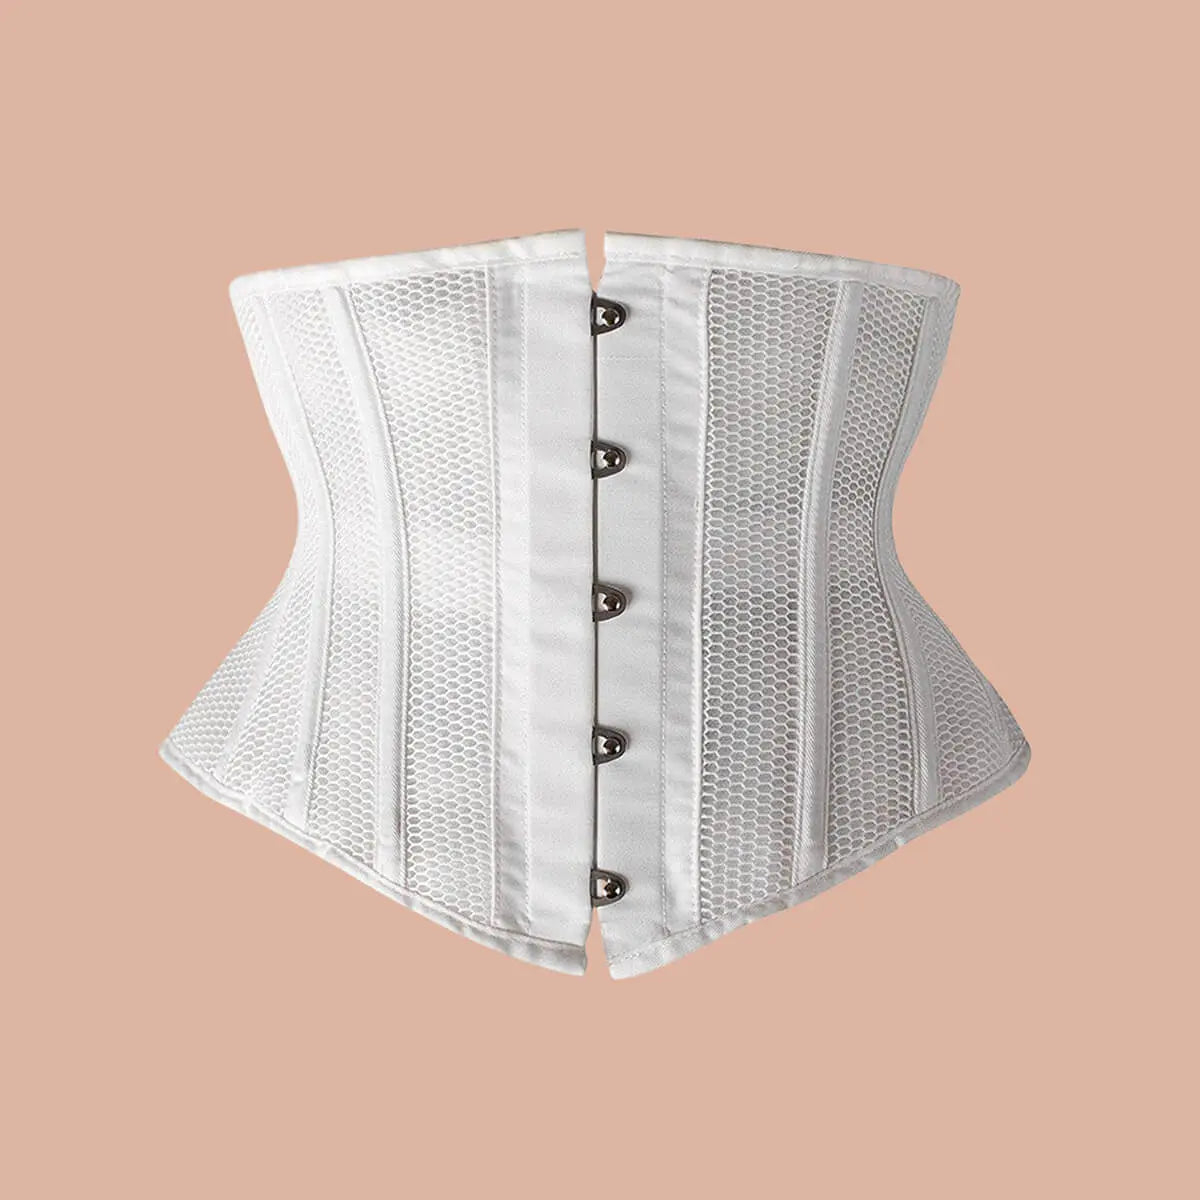 Waist shaping corset - dreamfitness for weight lose